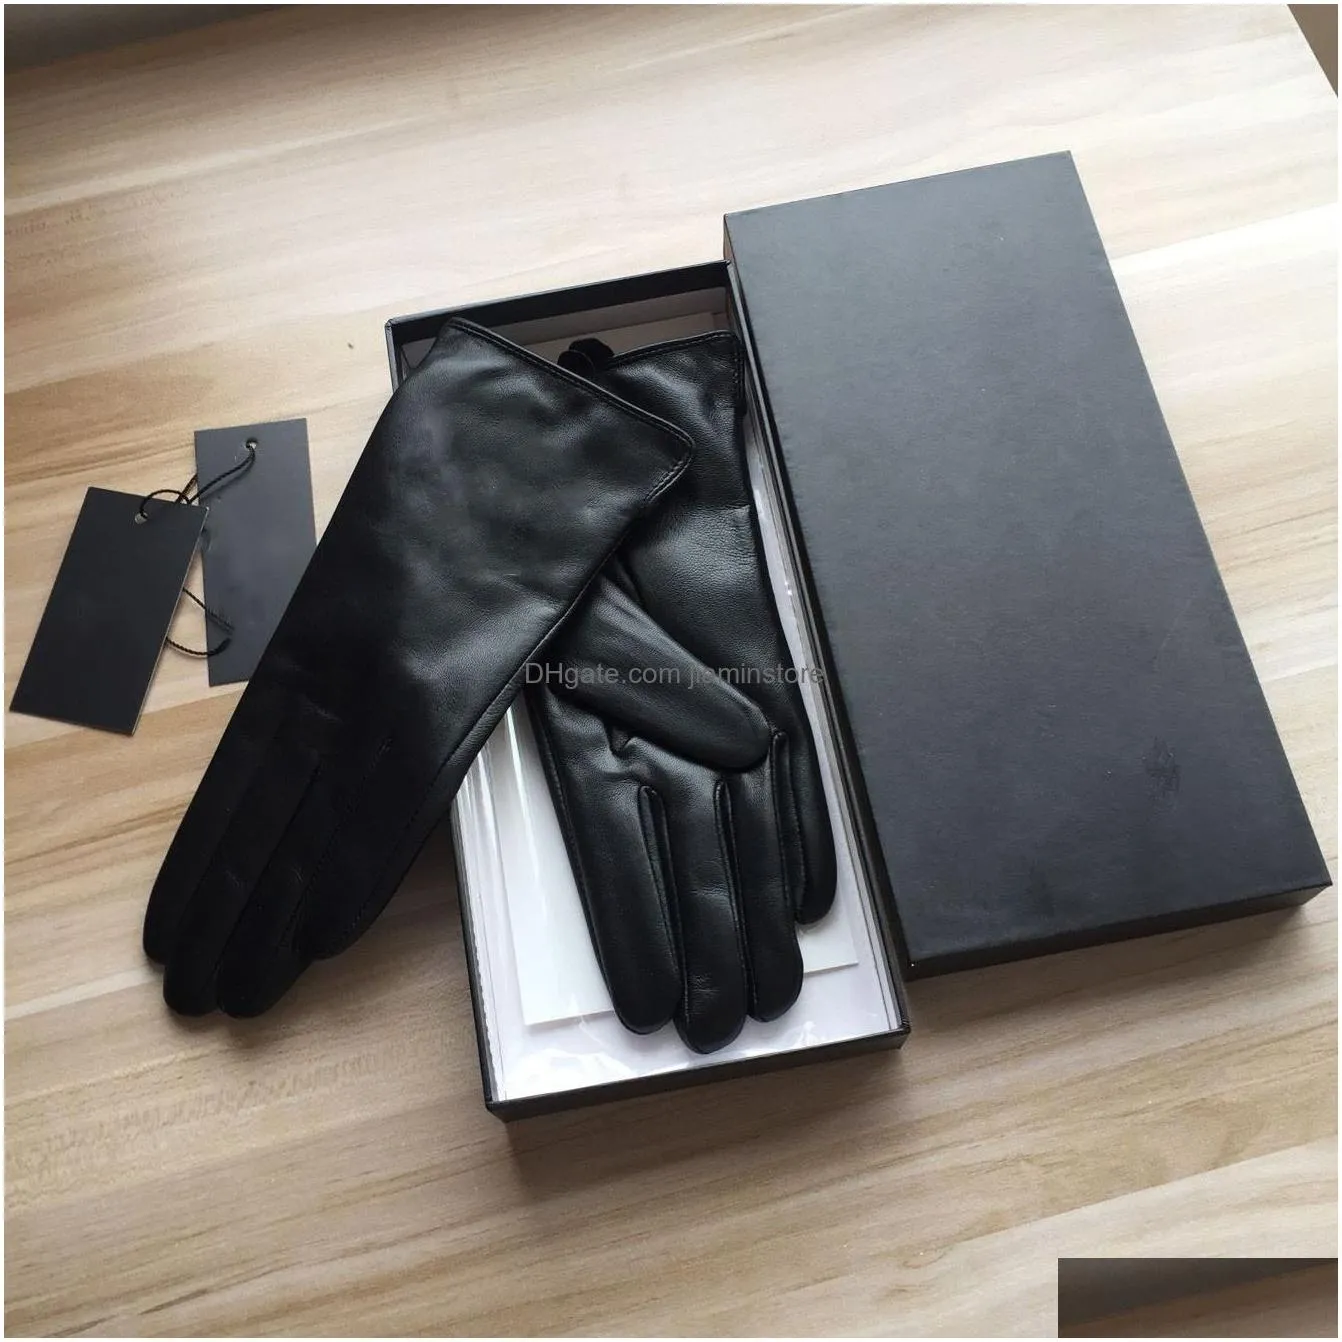 Fingerless Gloves 100% Sheepskin Gloves Inside Classic Brand Womens Warm Lined With Cashmere Rabbit Hair Muzzle Drop Delivery Fashion Dh7Ux